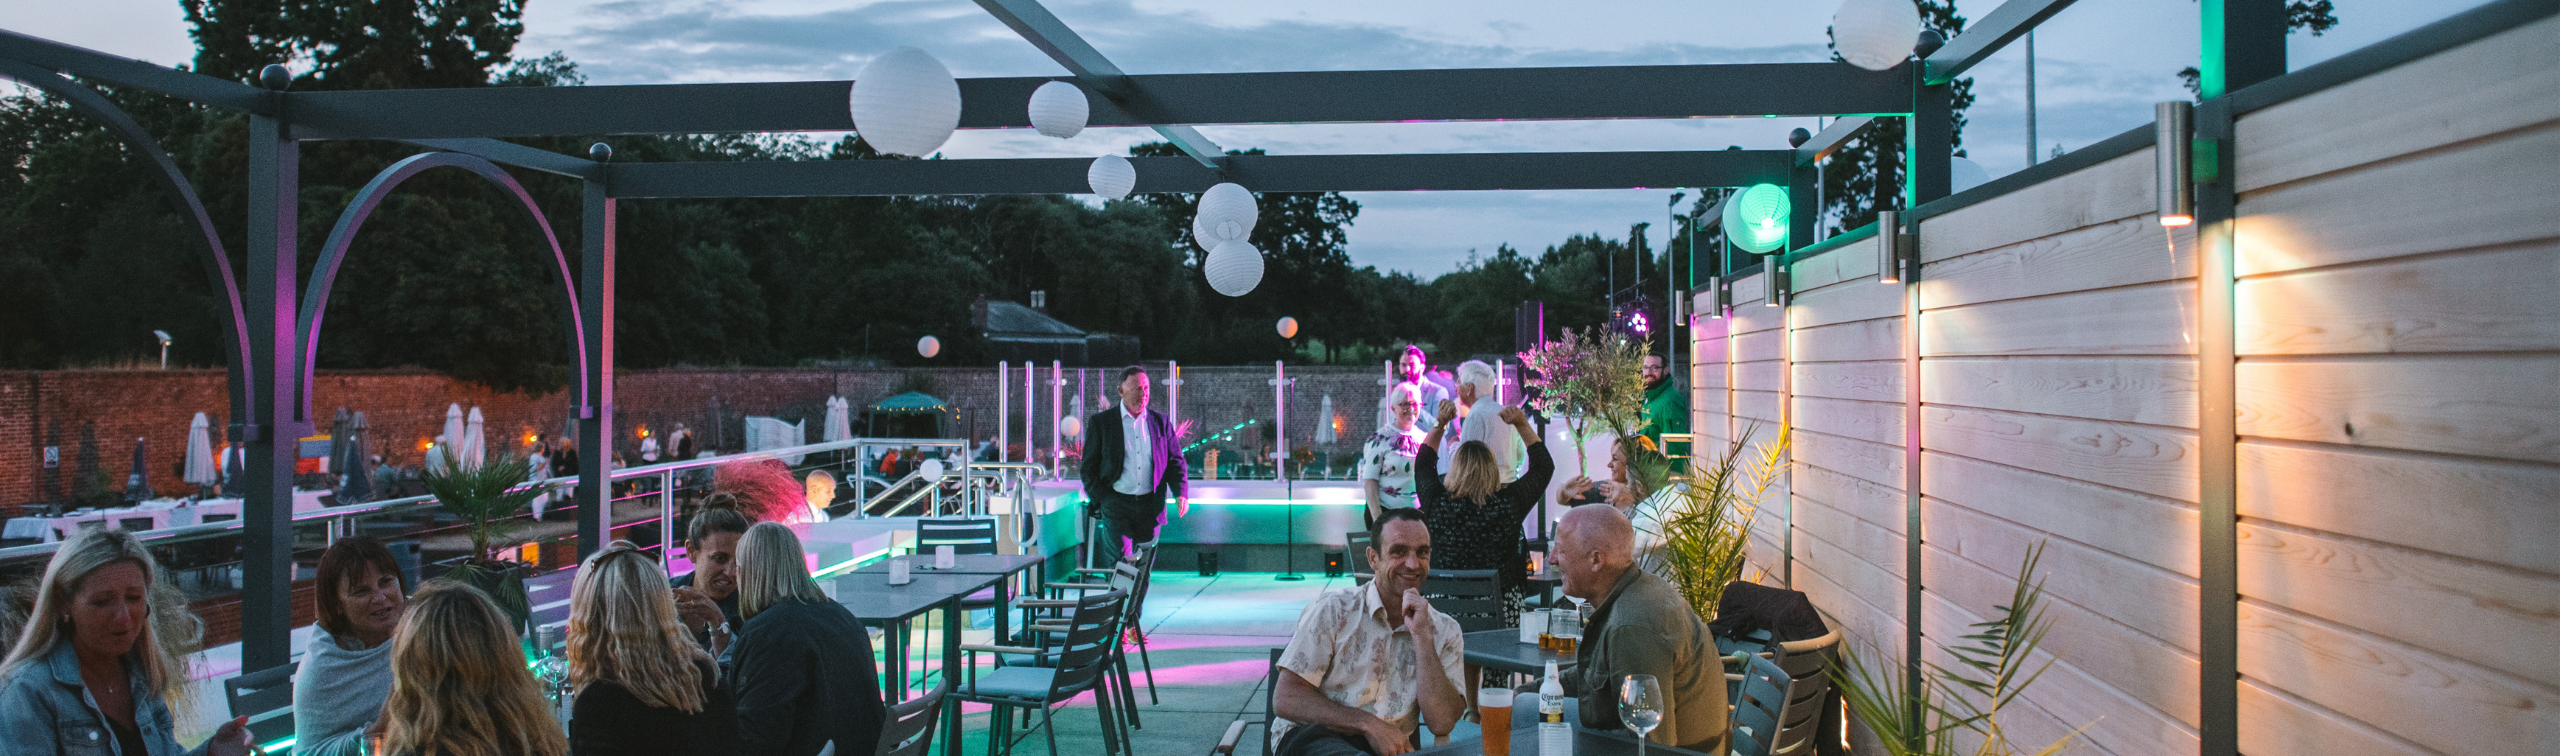 book an event, exeter golf and country club, meeting exeter, meeting rooms exeter, exeter events, function rooms exeter, party rooms exeter, book a party exeter